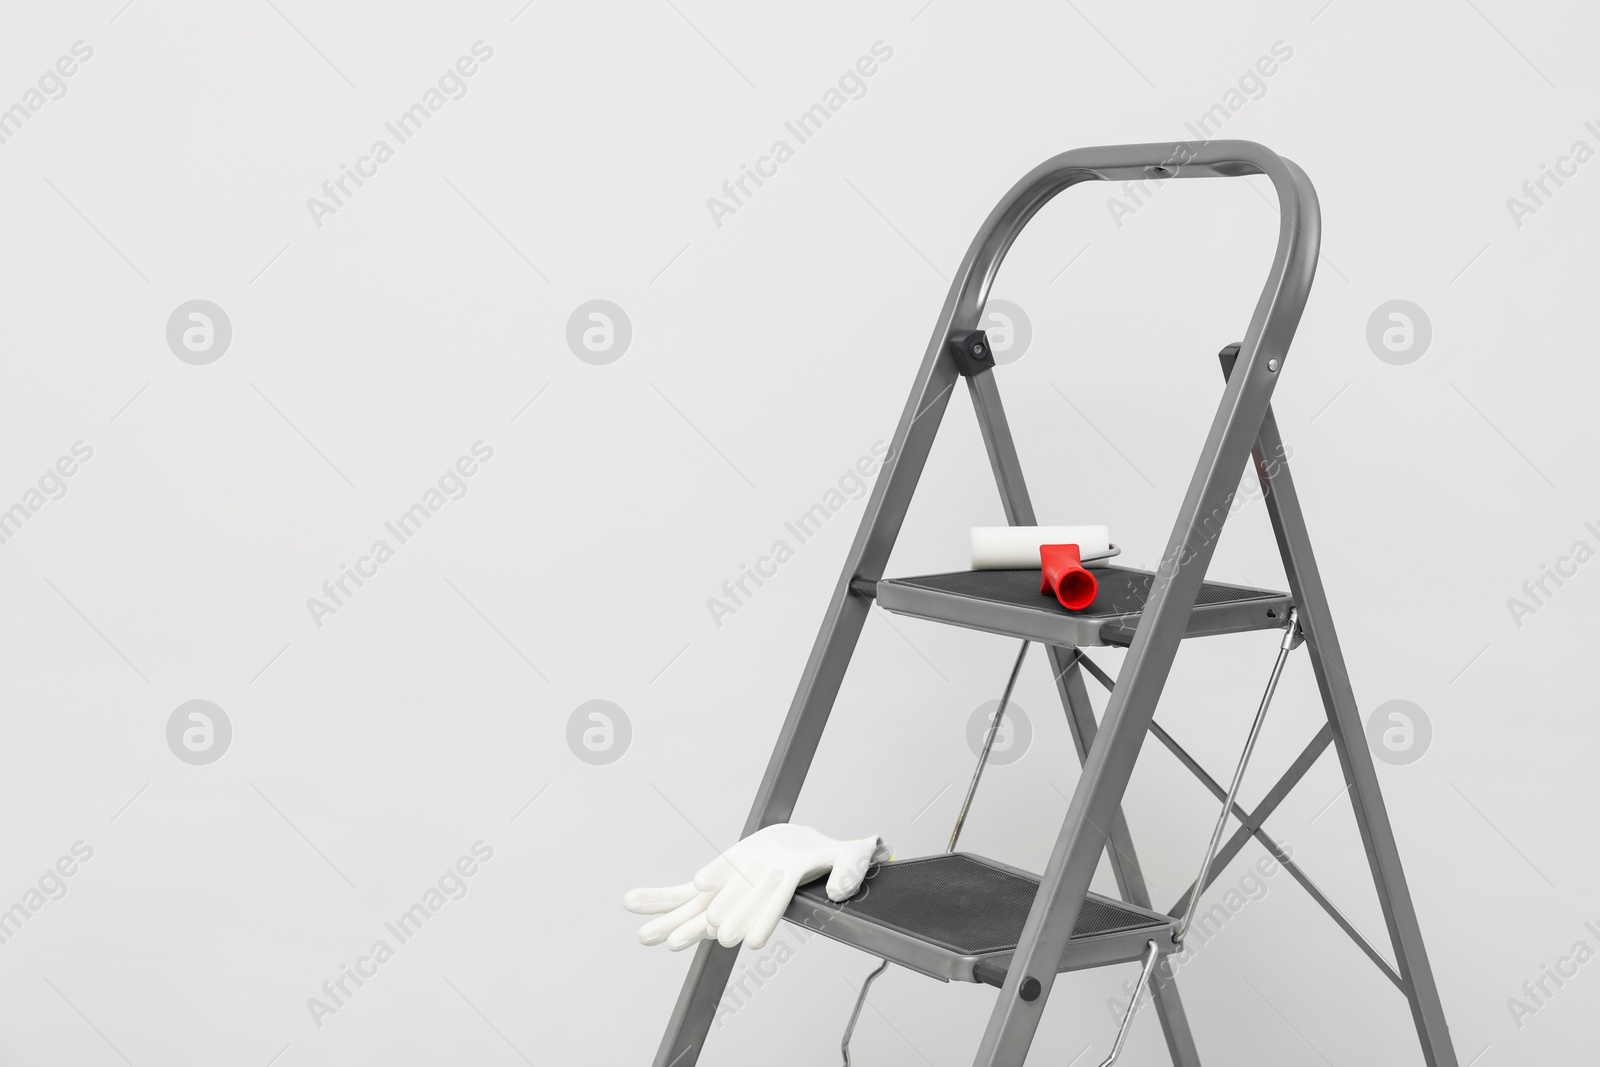 Photo of Metallic folding ladder, paint roller brush and rubber gloves near light grey wall, space for text